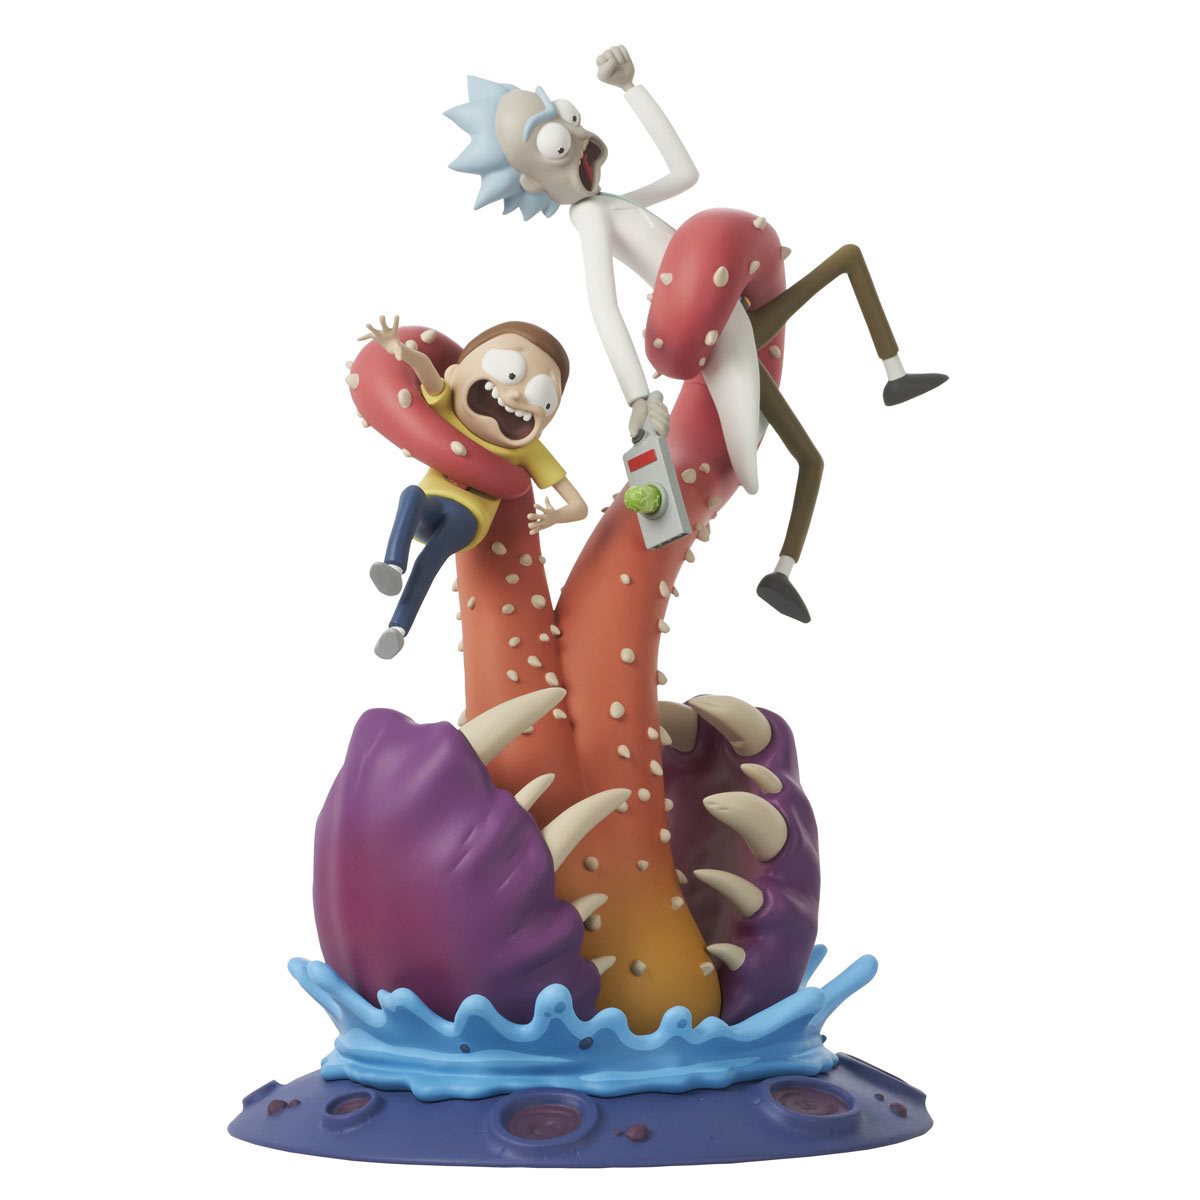 Rick and Morty Gallery Statue - Entertainment Earth